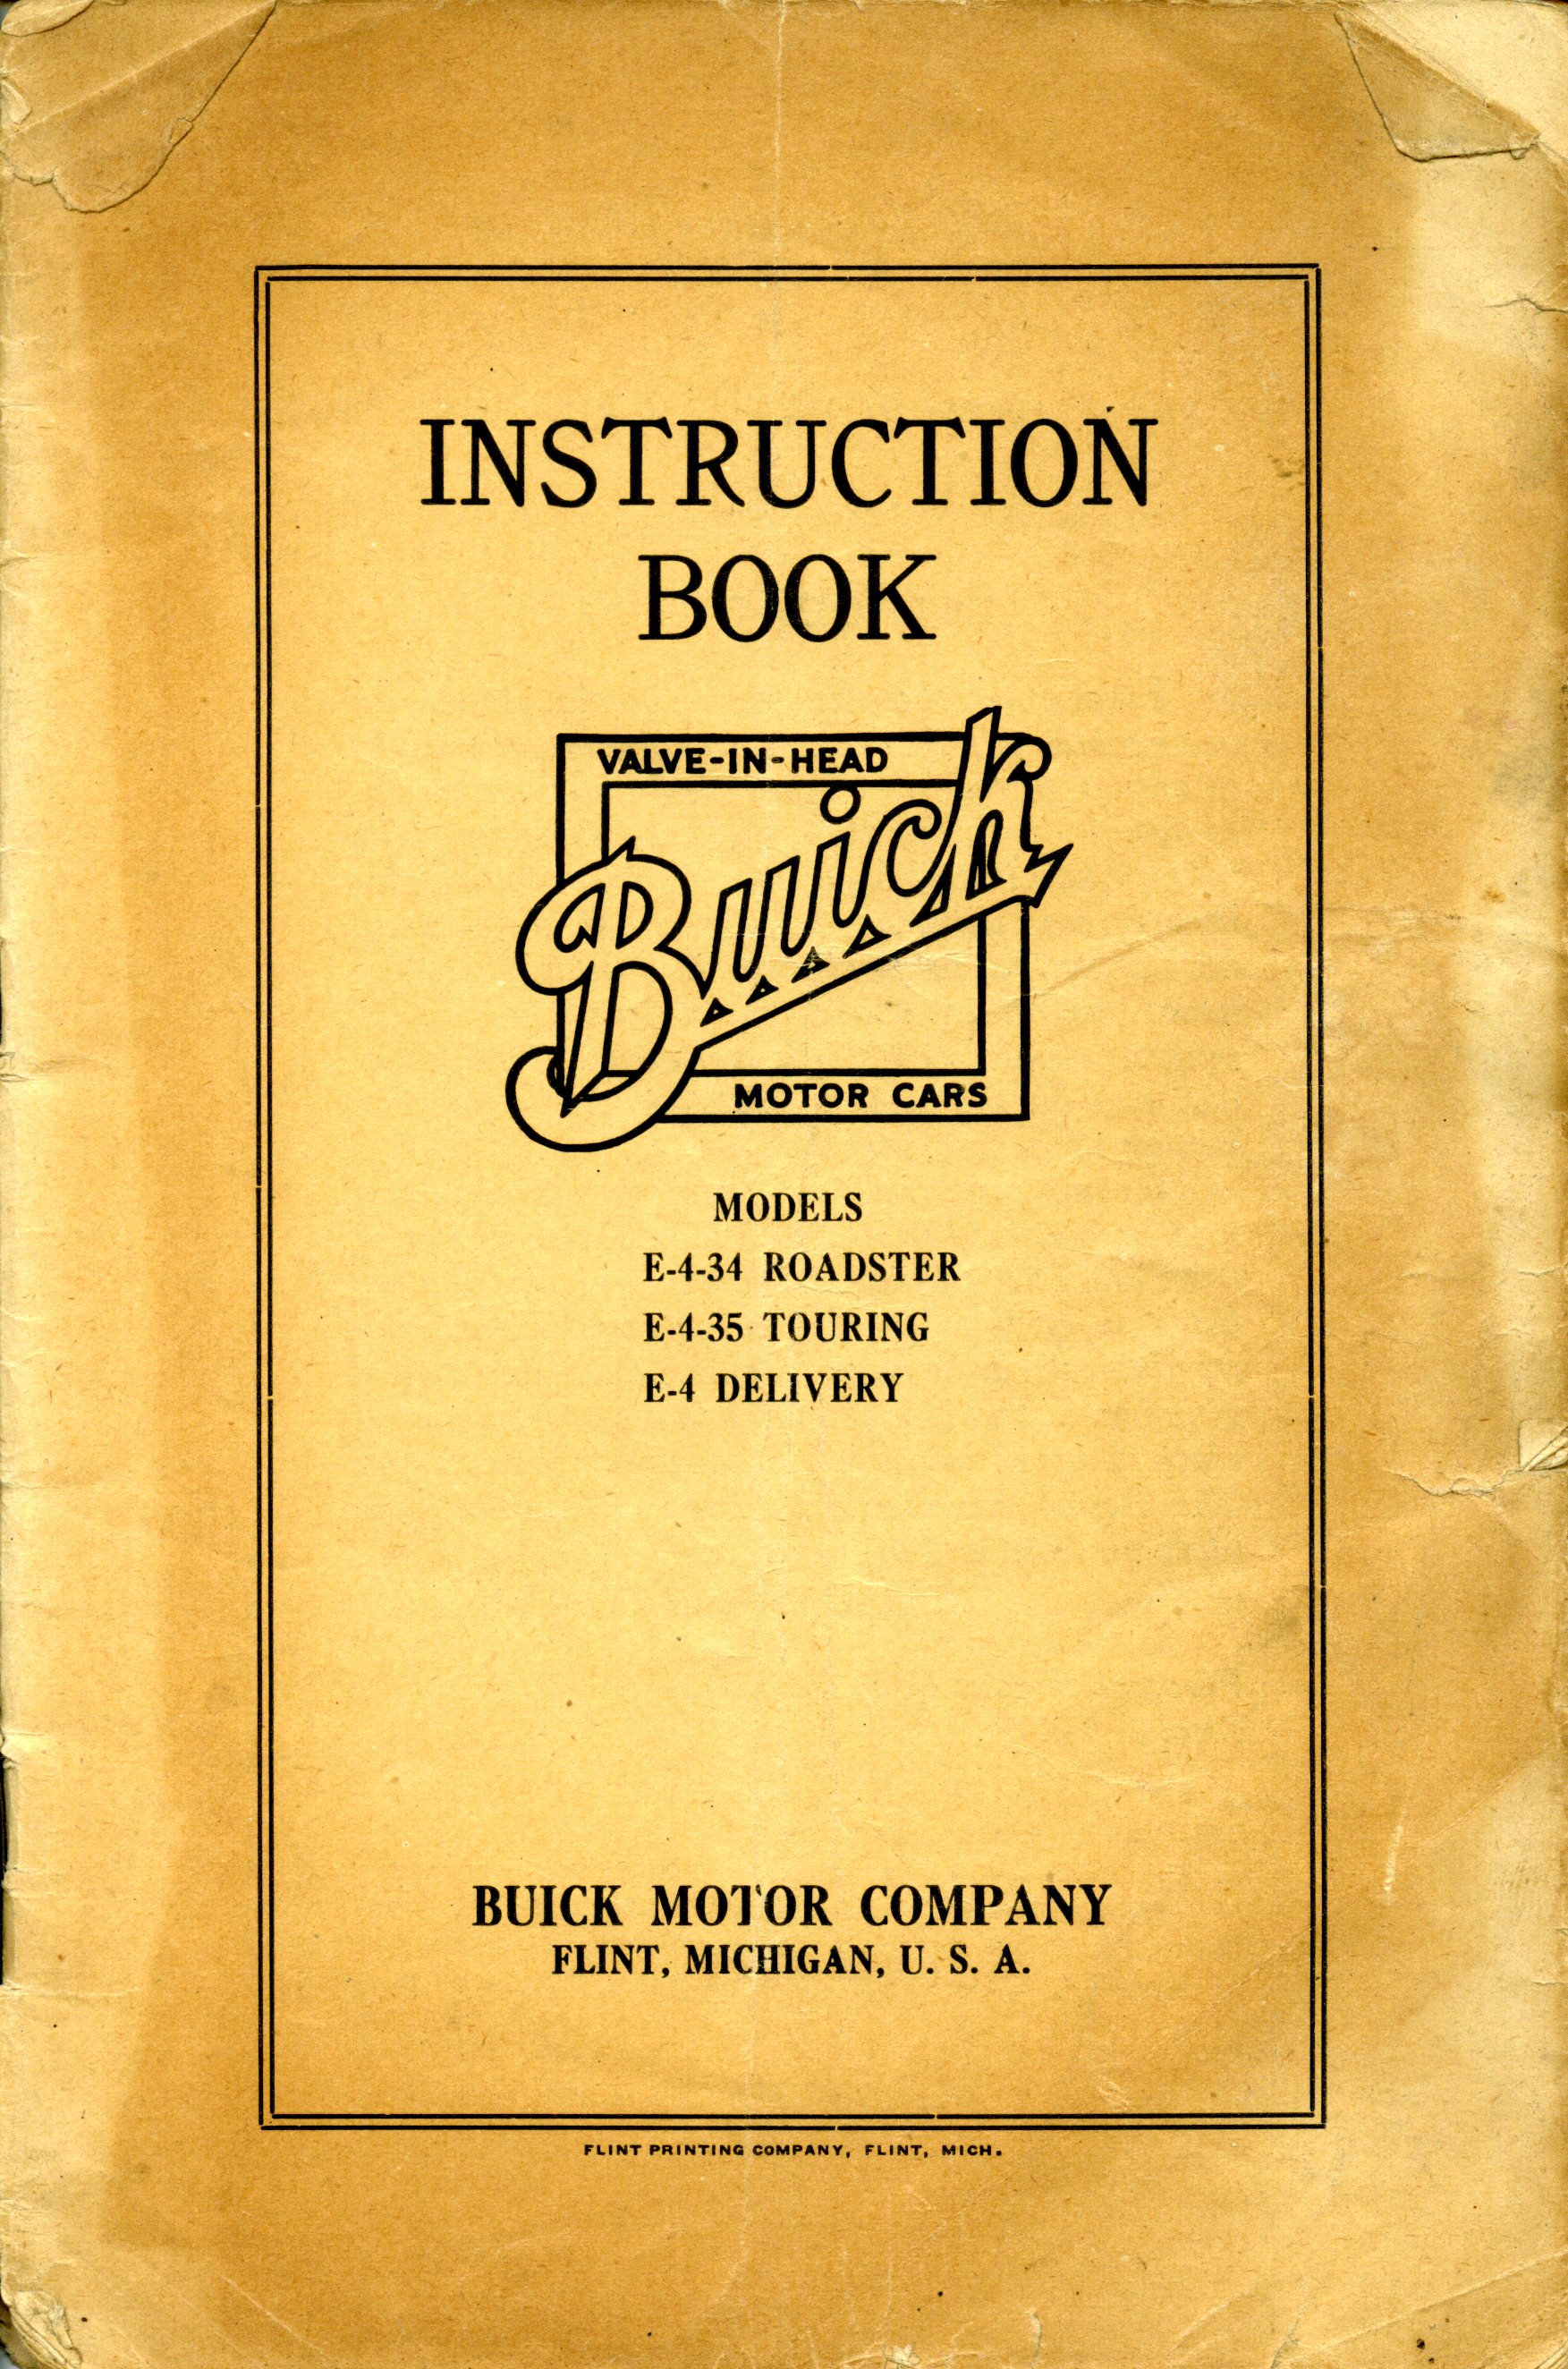 1918 Buick Instruction Book-4 Cyl-01